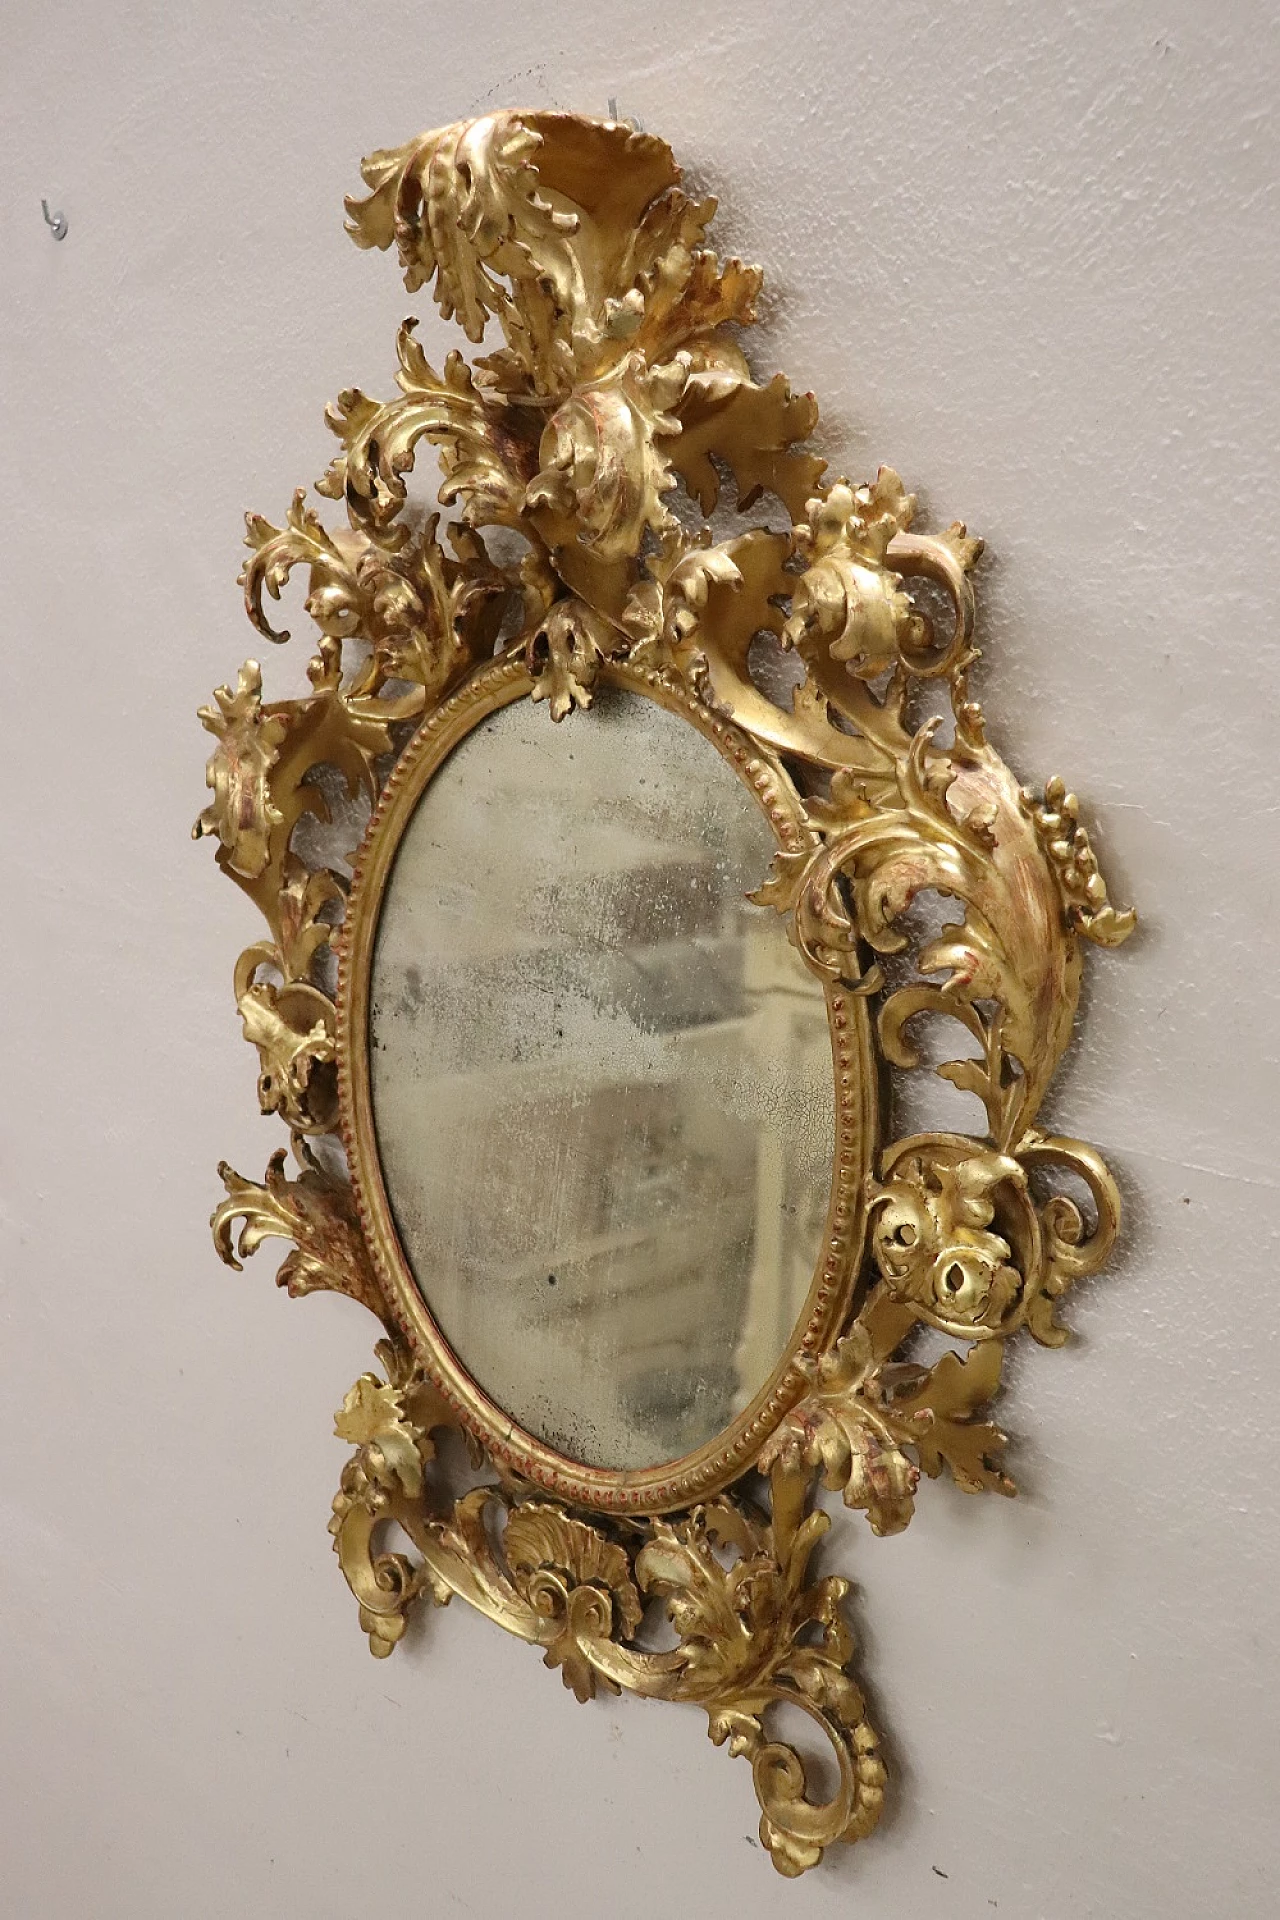 Cartoccio mirror in carved and gilded wood, 18th century 3